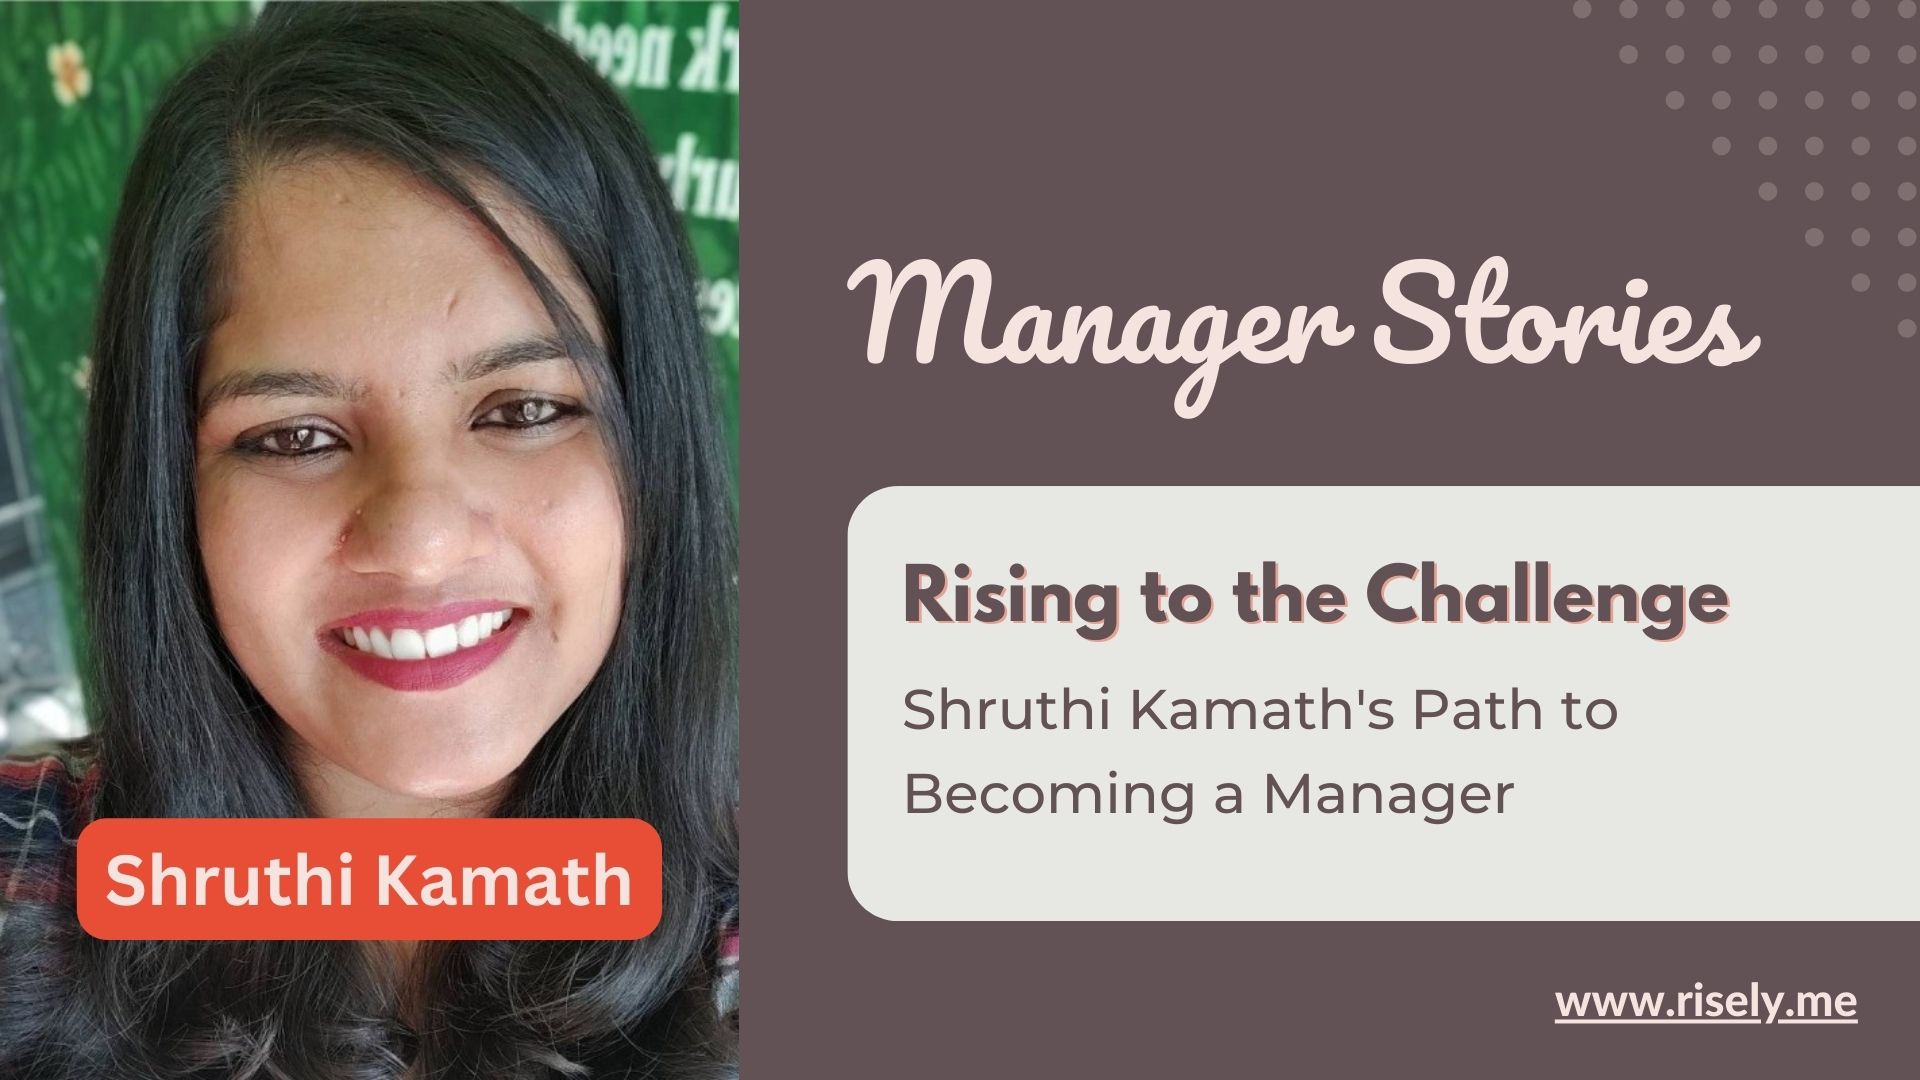 Shruthi Kamath's Path to Becoming a Manager